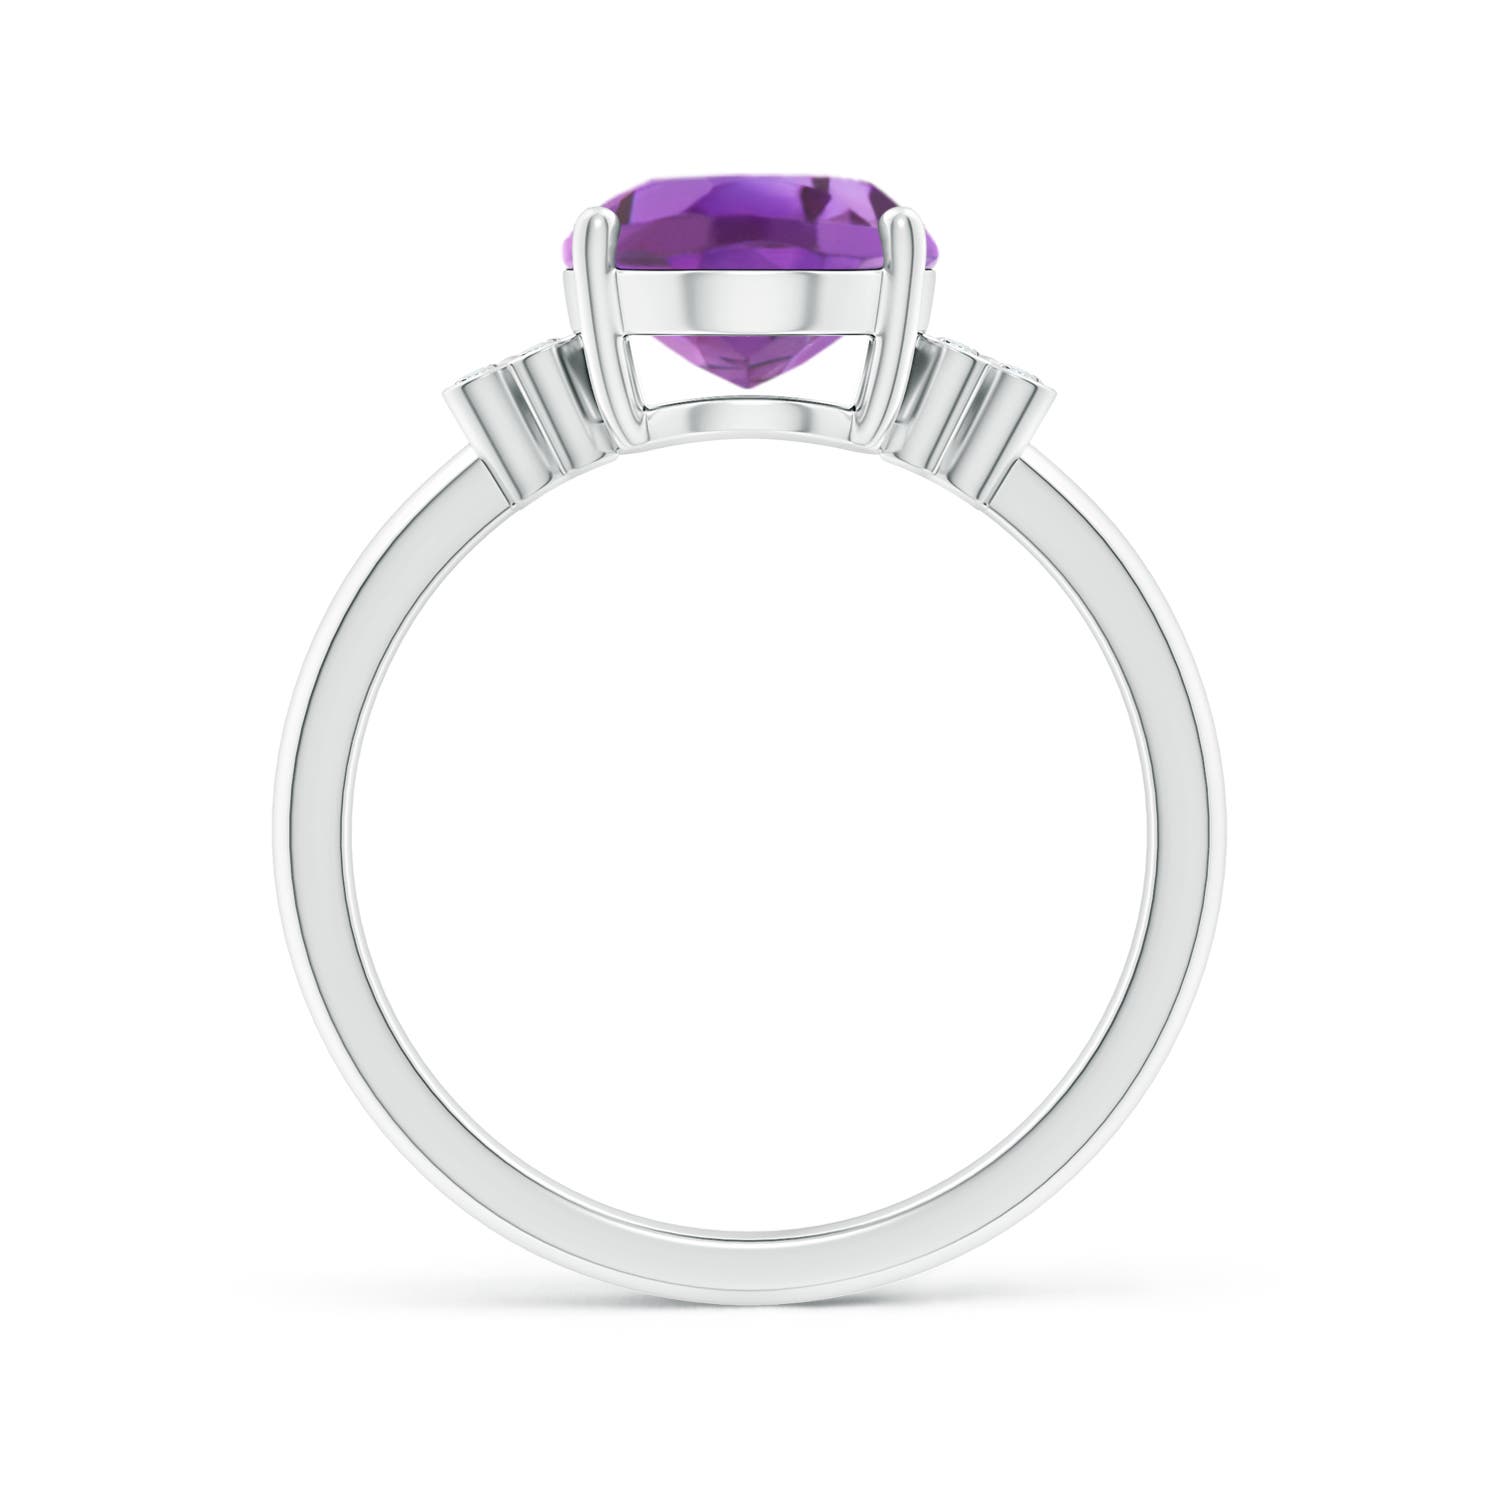 A - Amethyst / 2.36 CT / 14 KT White Gold